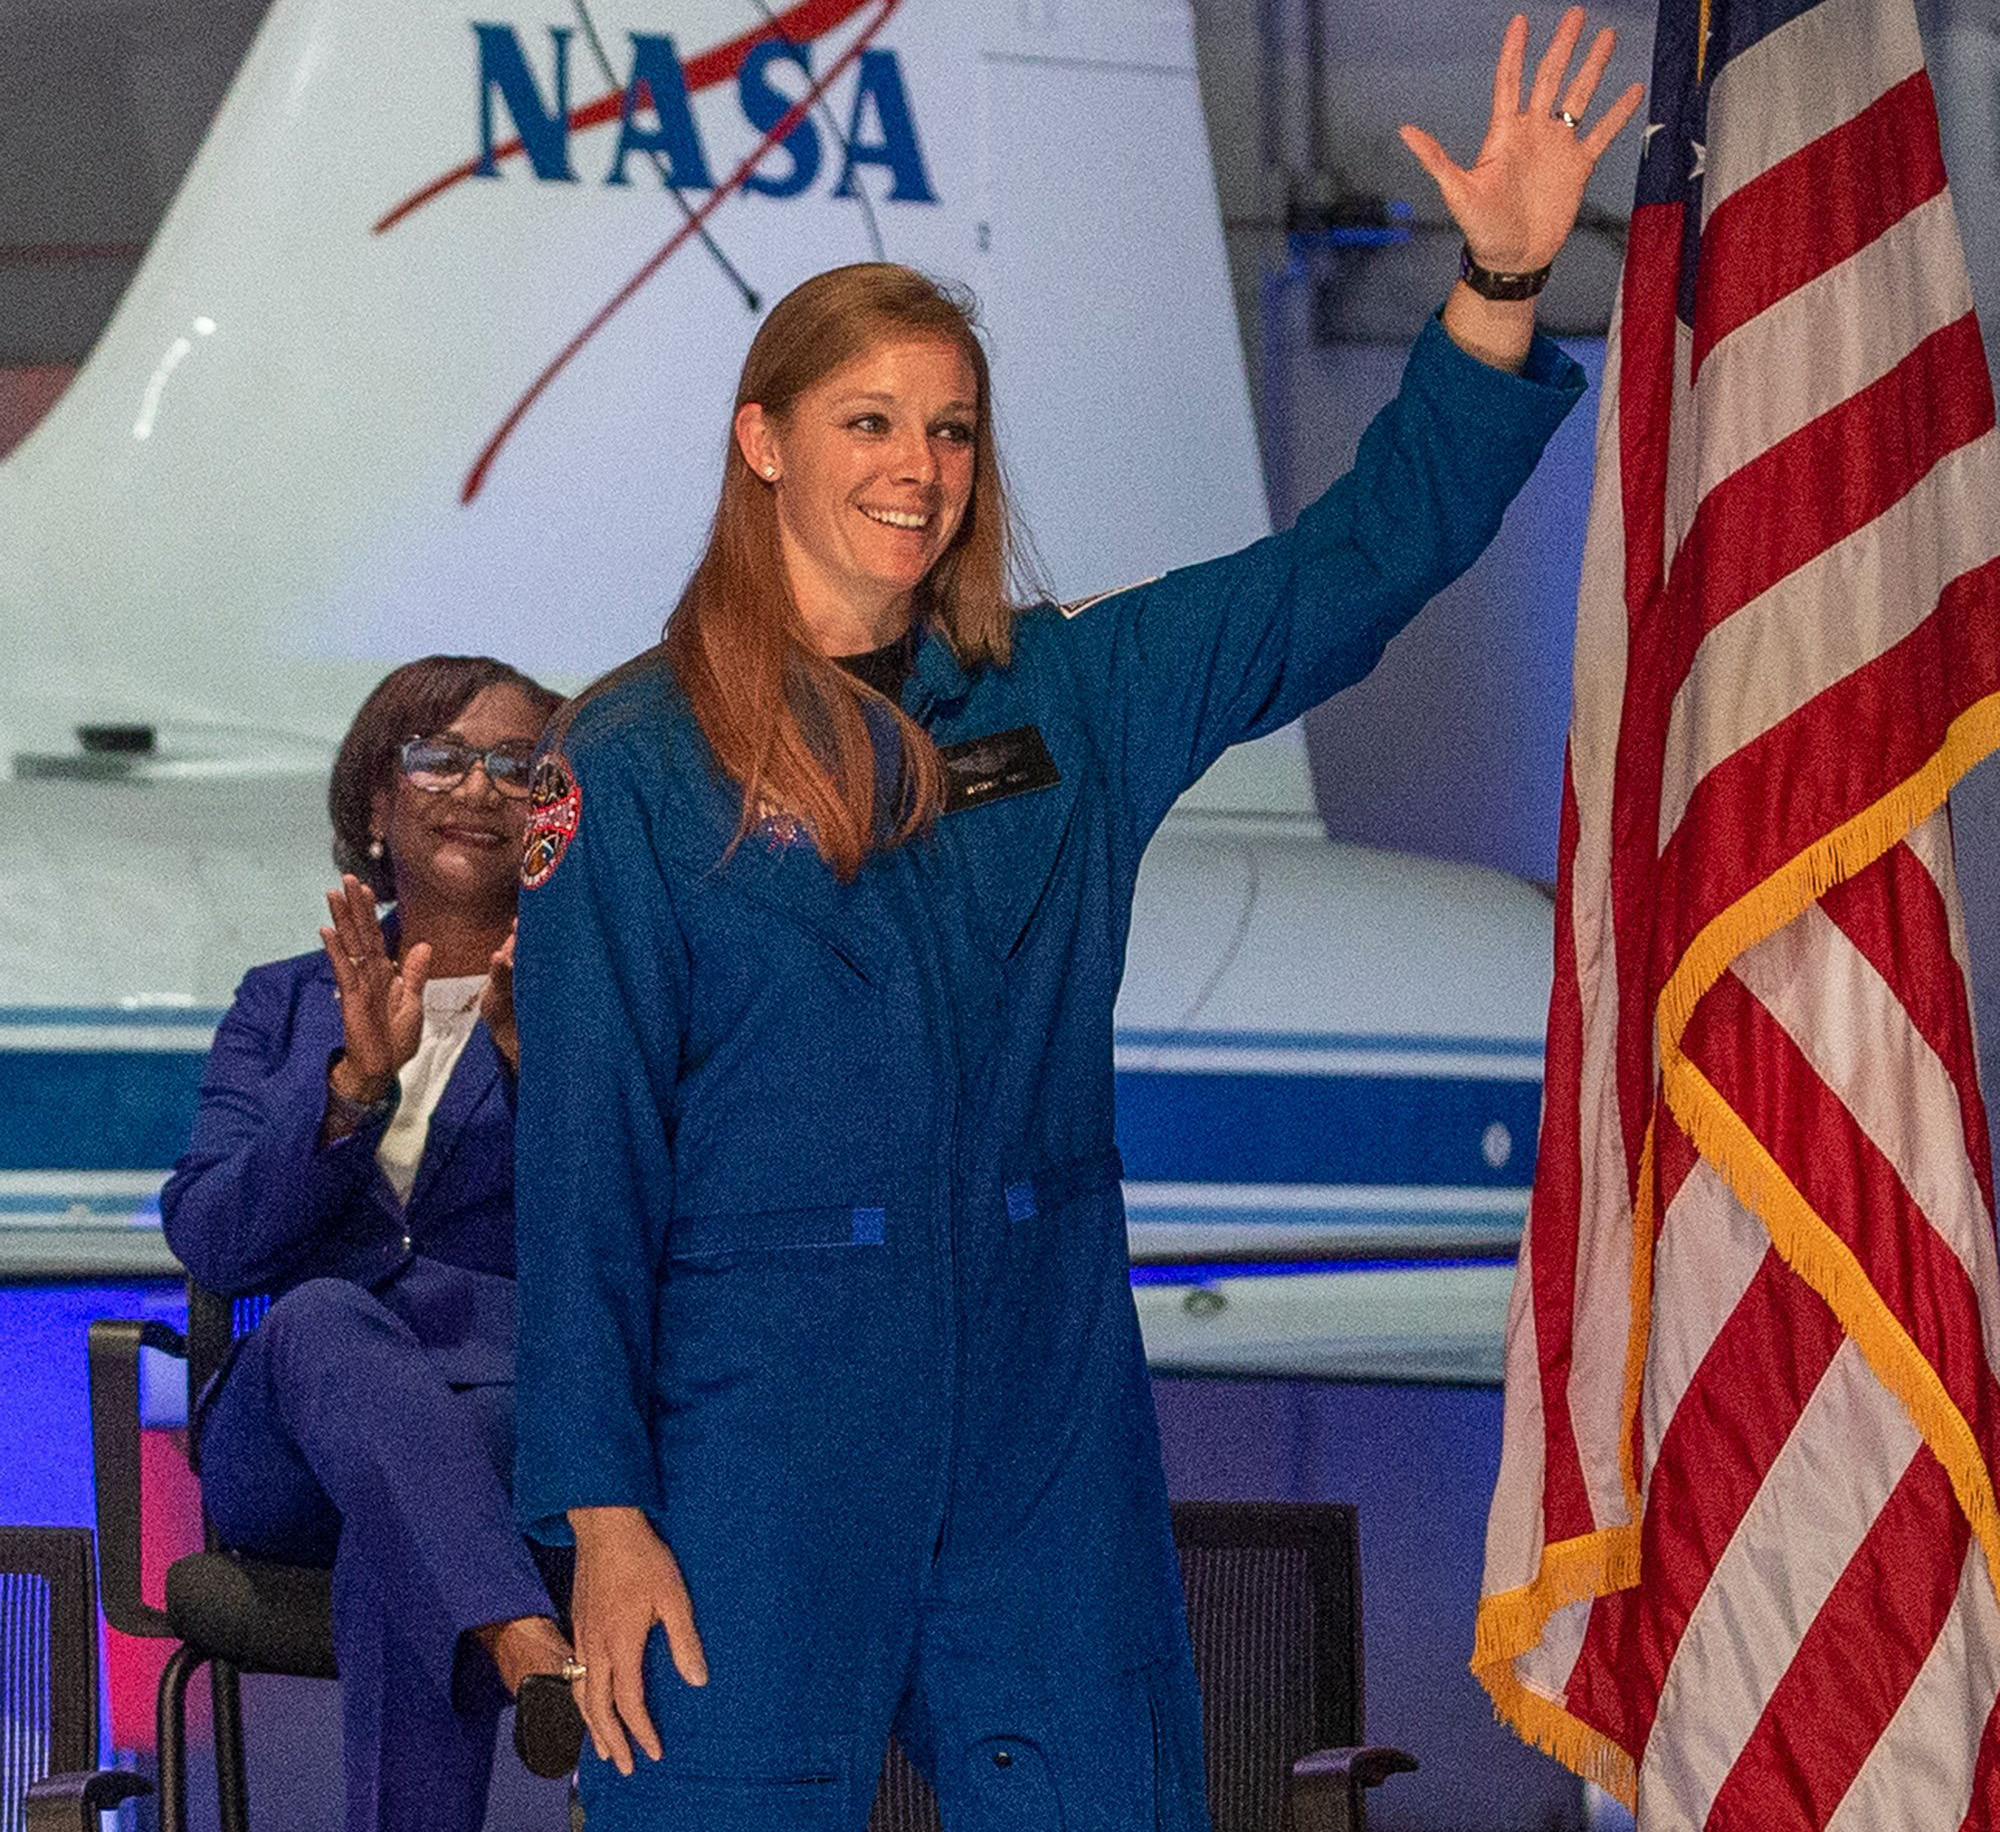 Nichole Ayers, 32, major, US Air Force, waves as she is introduced at the NASA's 2021 Astronaut Candidate announcement event on December 6, 2021 at Ellington Field in Houston, Texas. - NASA announced its 10 latest trainee astronauts, who include a firefighter turned Harvard professor, a former member of the national cycle team, and a pilot who led the first-ever all-woman F-22 formation in combat. The 2021 class was whittled down from a field of more than 12,000 applicants and will now report for duty in January at the Johnson Space Center in Texas, where they will undergo two years of training.